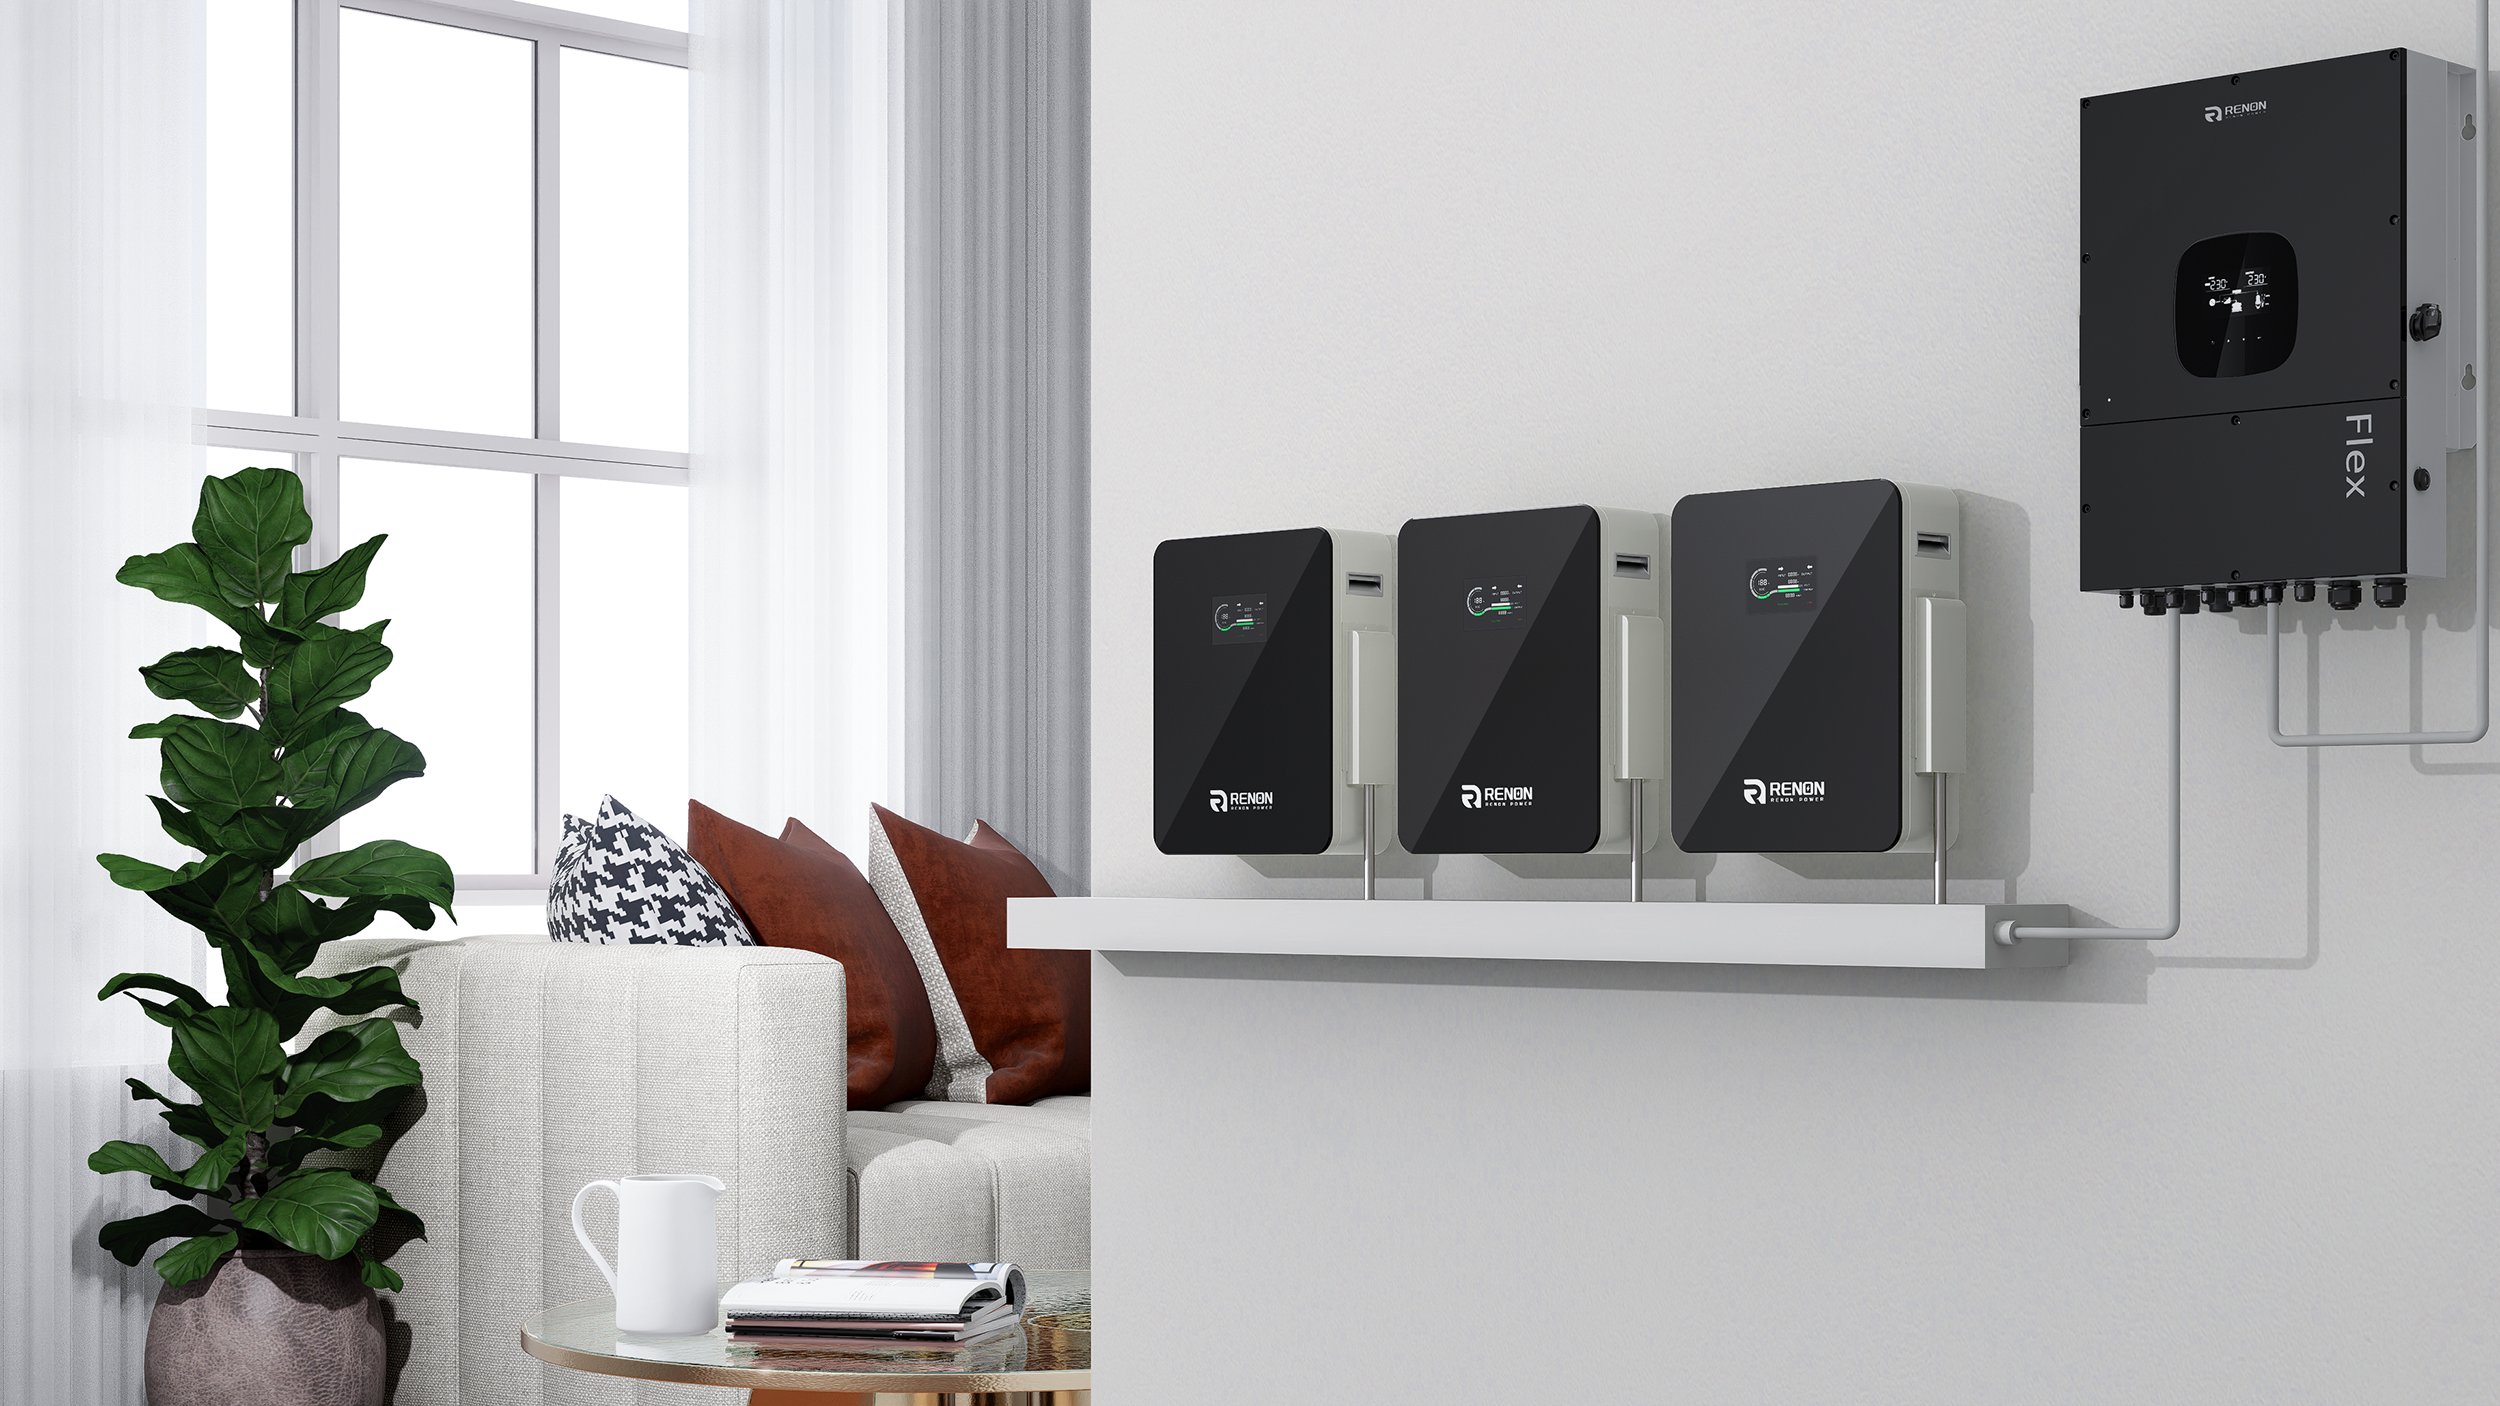 Renon Flex inverter works with wall-mounted Xcellent battery.